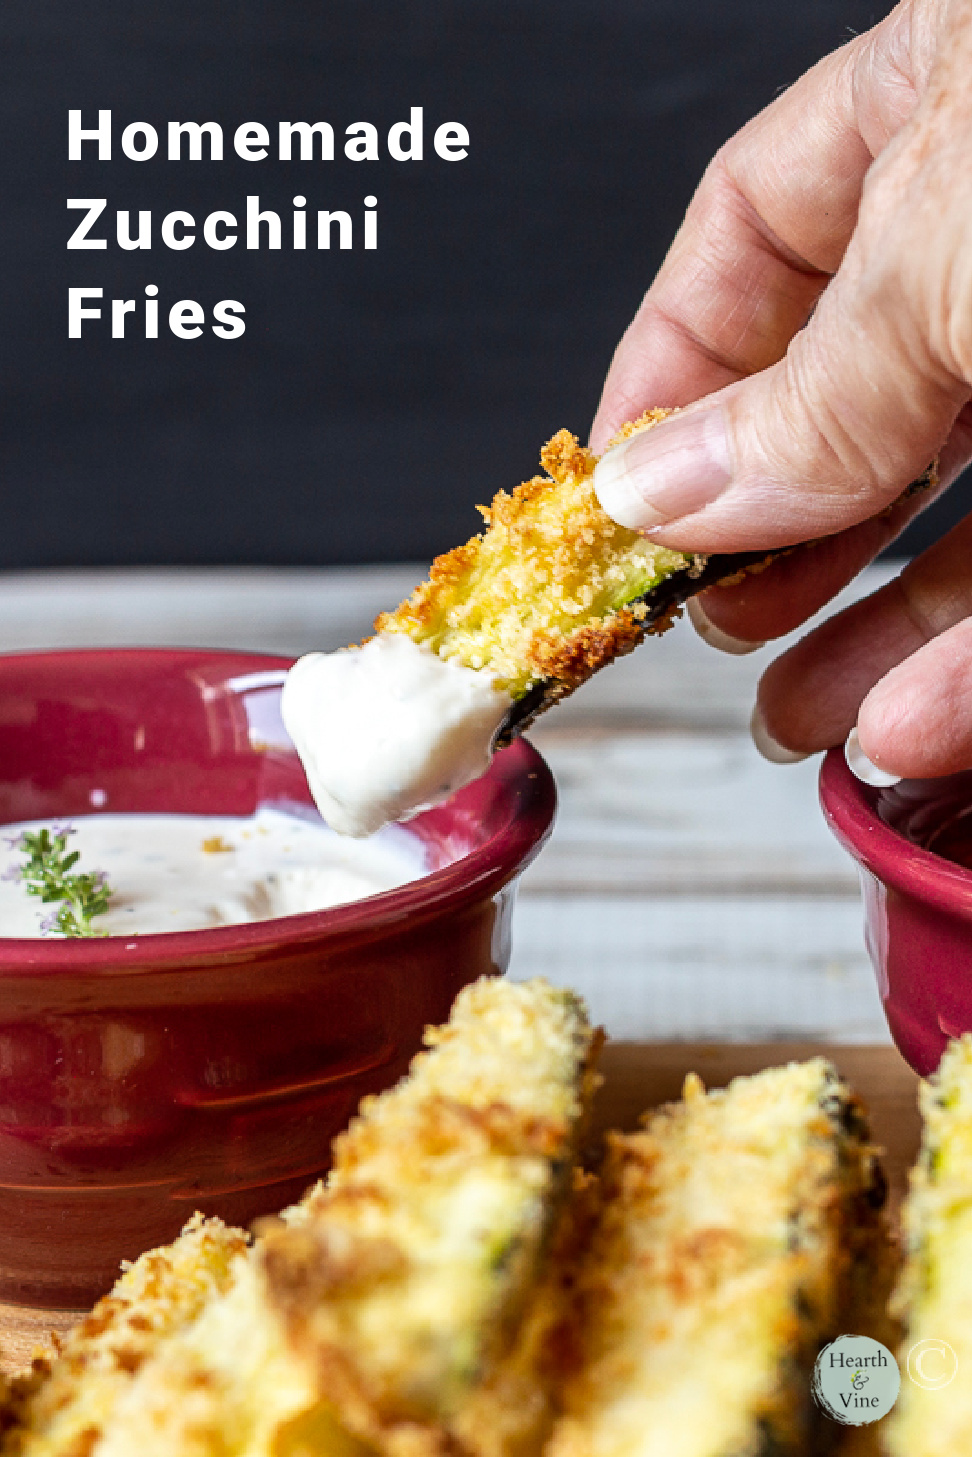 A hand dipping a baked zucchini fry in ranch dressing.